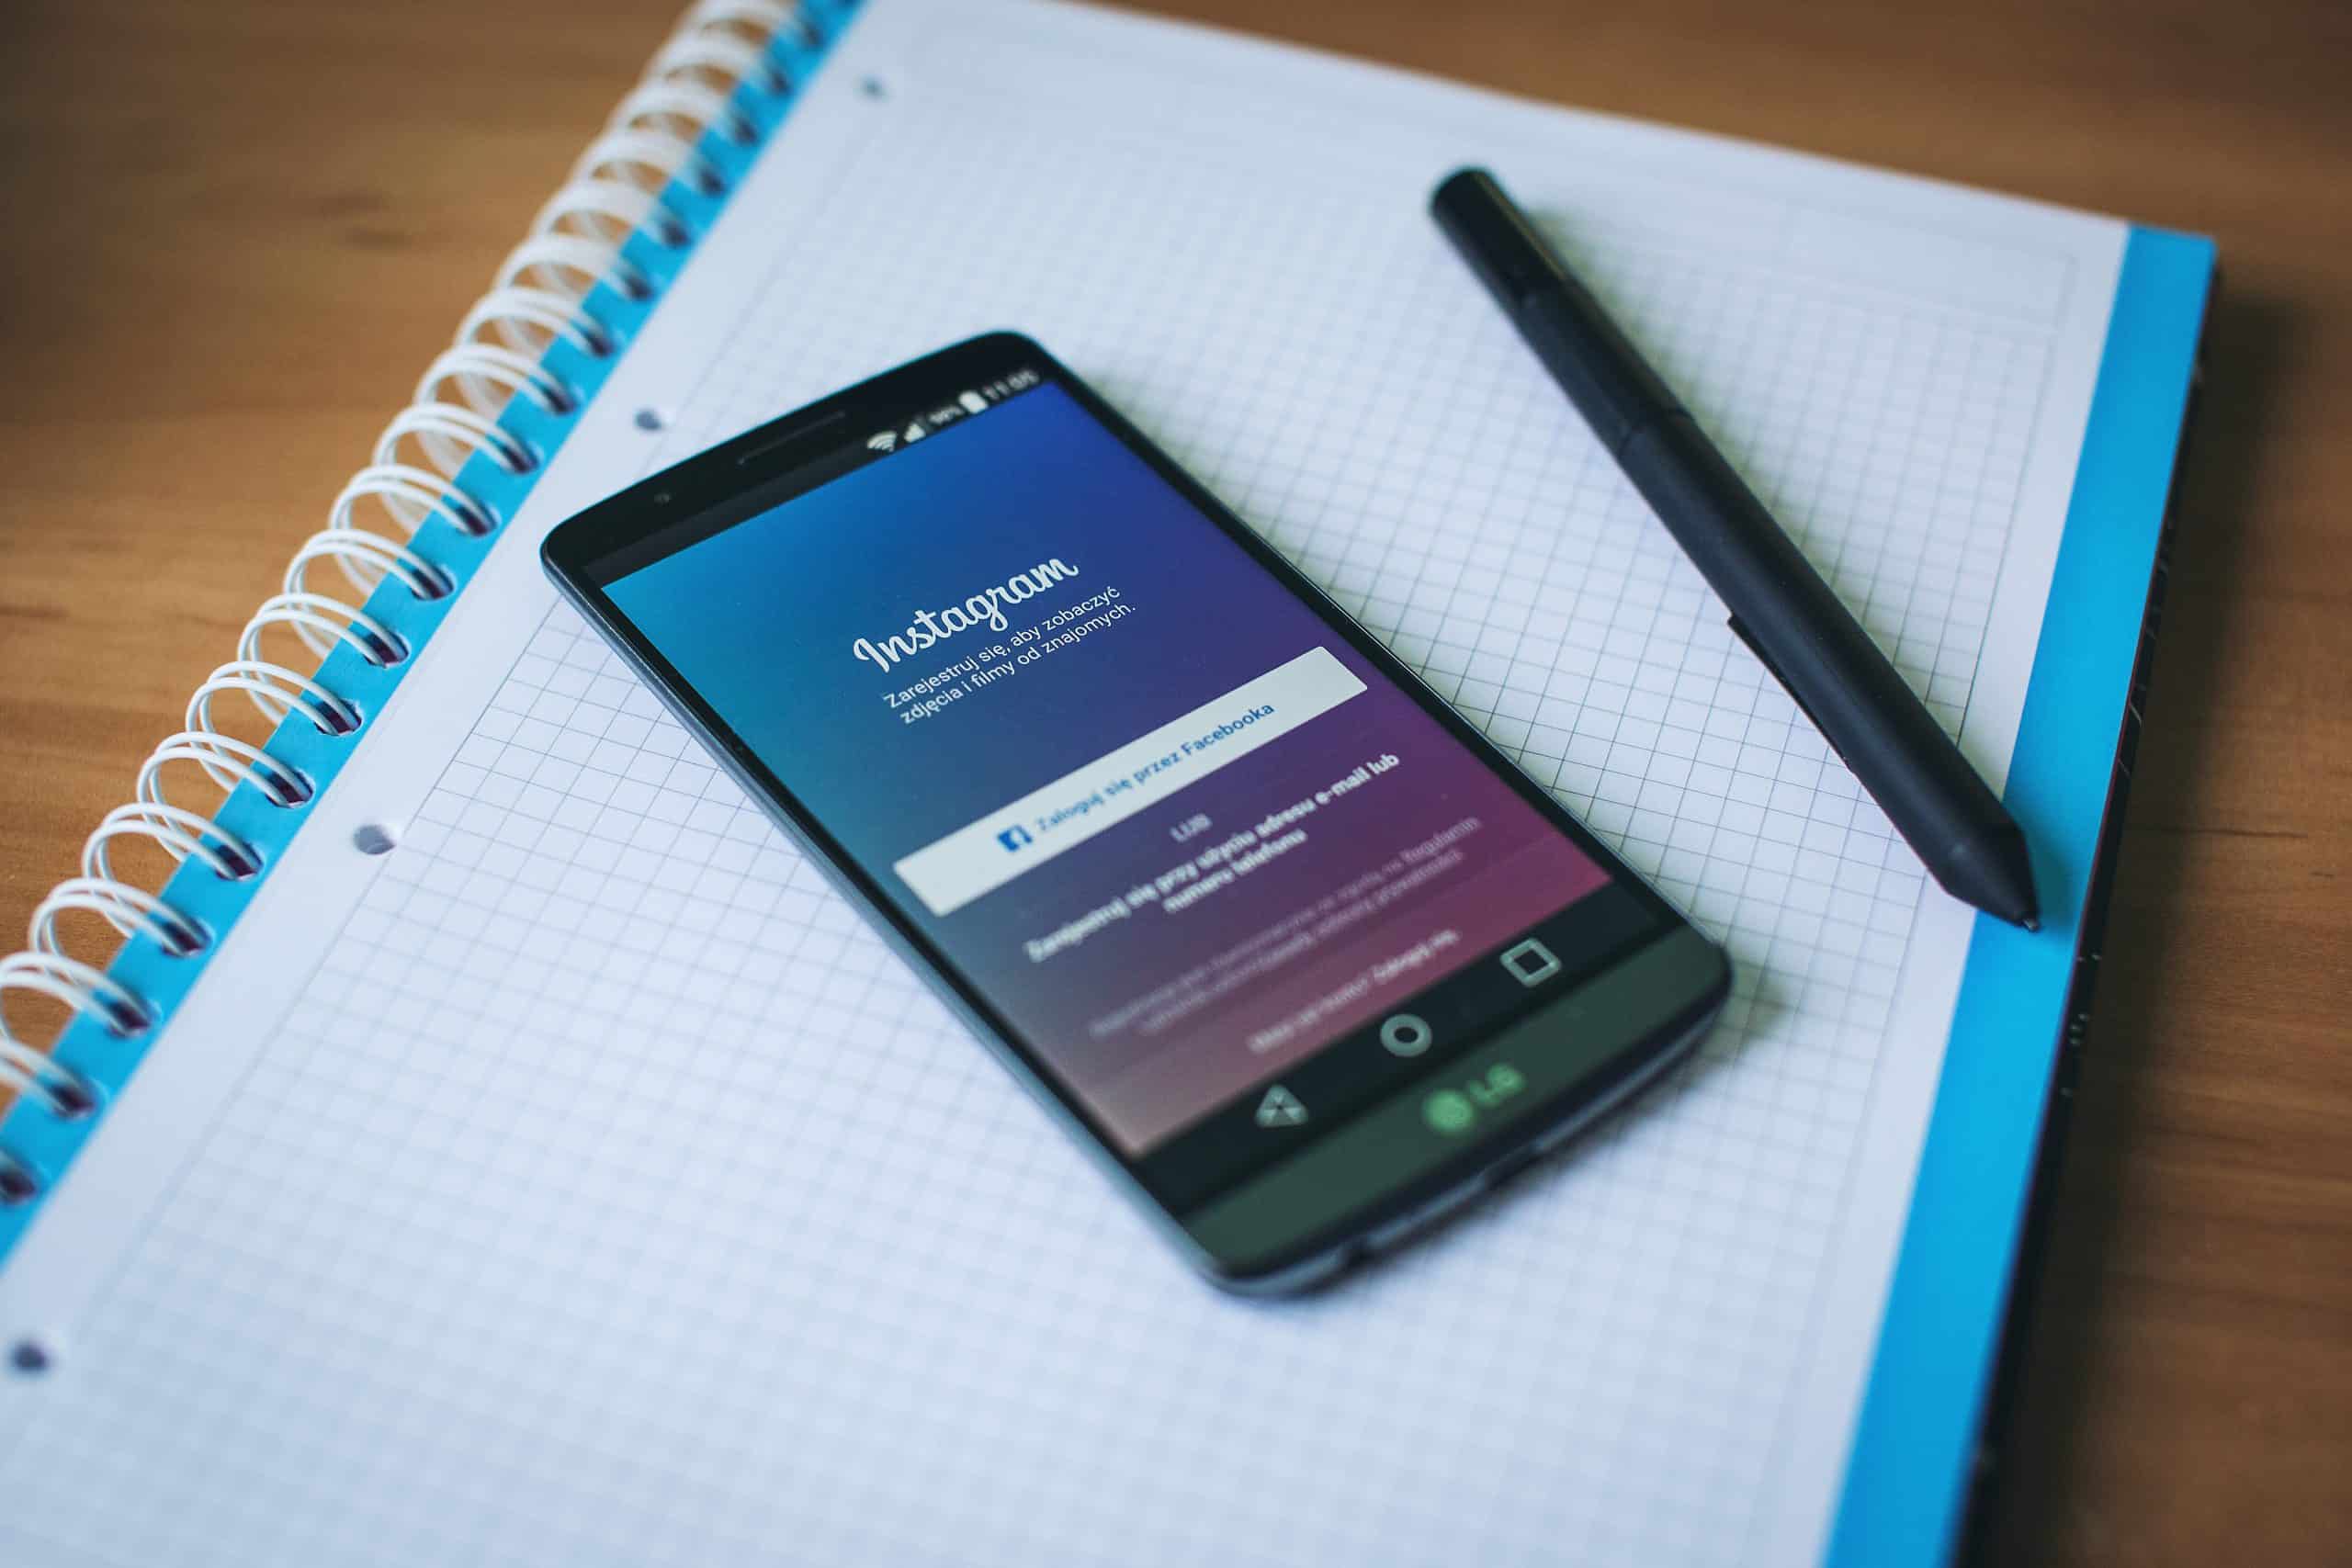 Facebook login page shown on a smartphone that is resting on a notebook and next to a pen